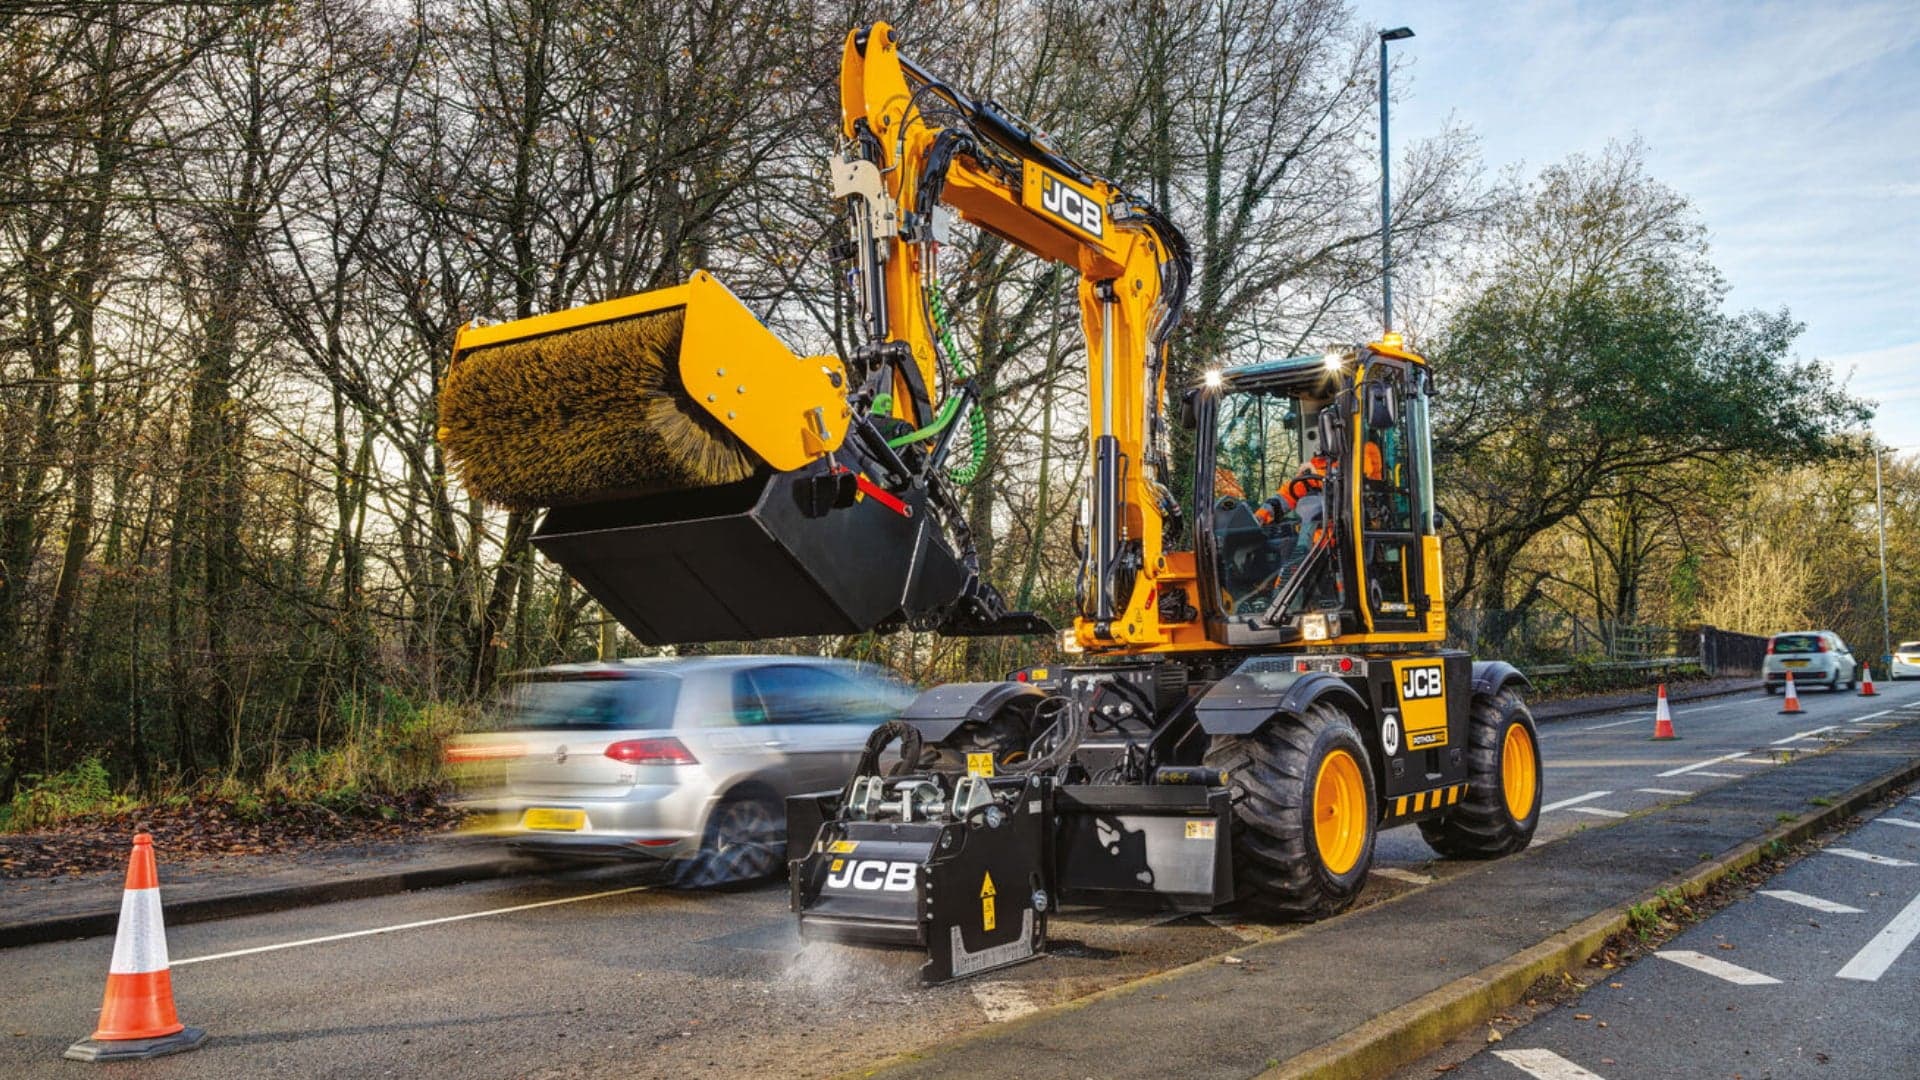 JCB’s New Machine Can Fix Potholes in Under 10 Minutes, Would Still Take Forever to Repair Our Roads